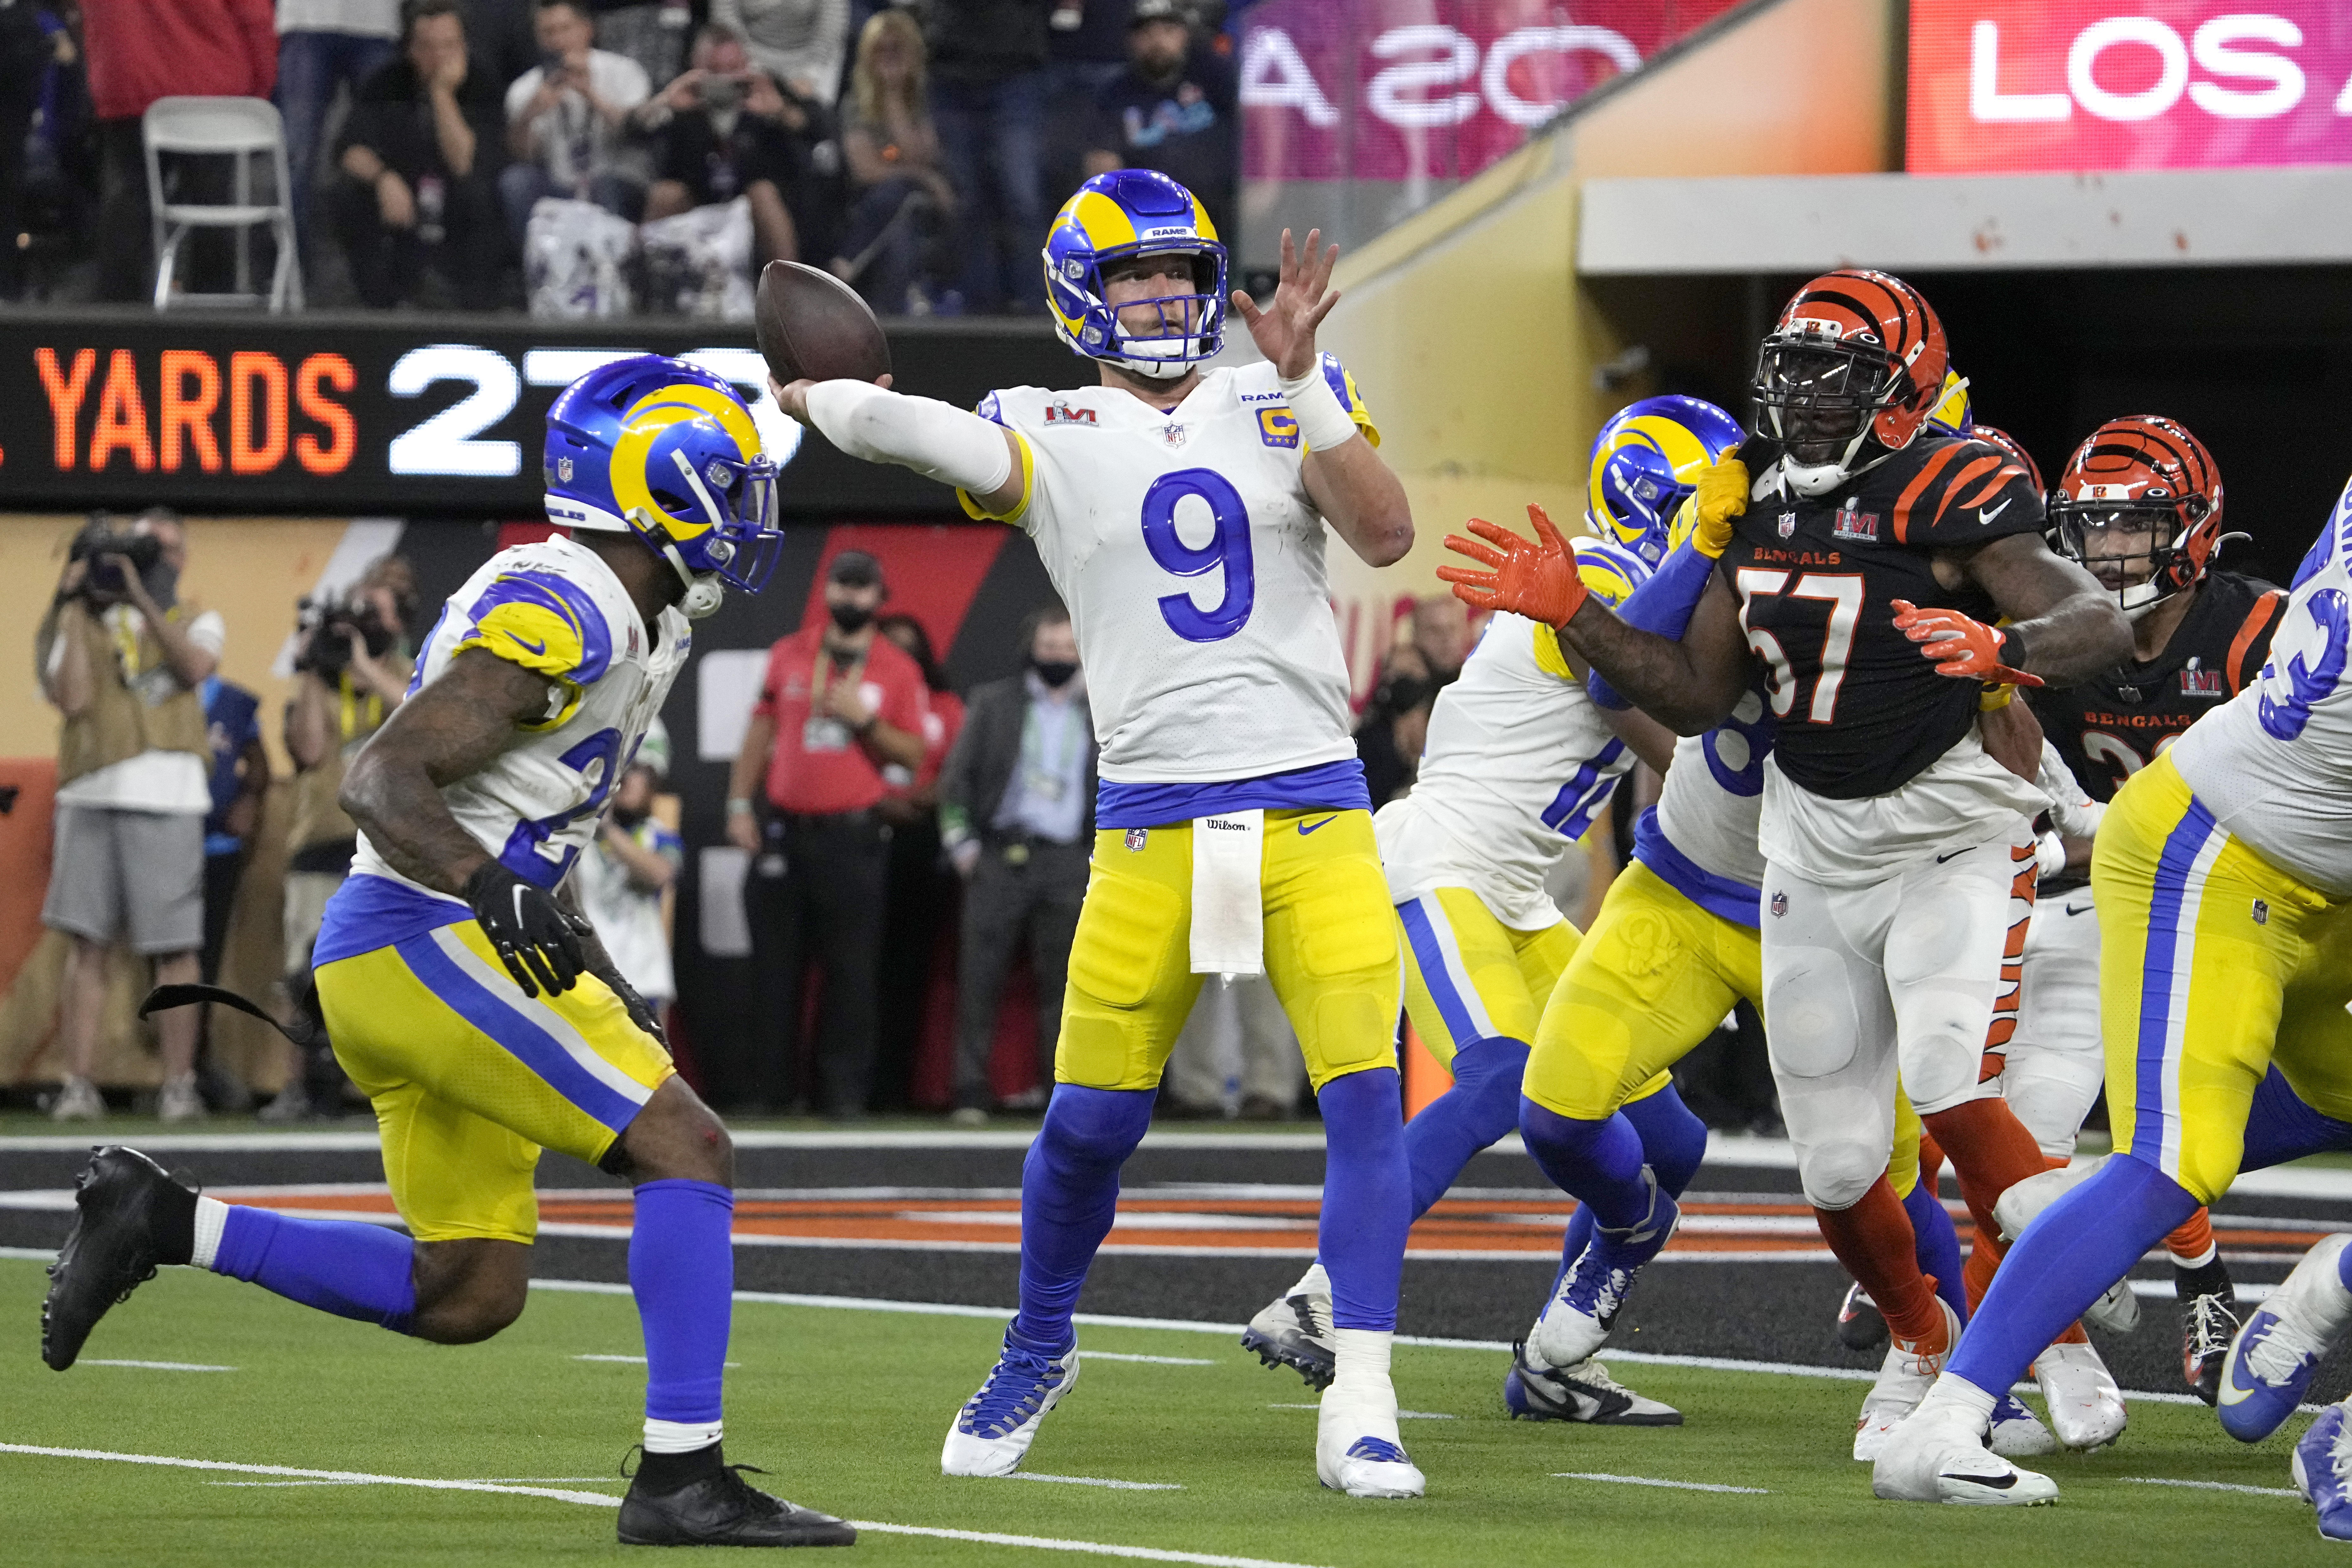 Super Bowl Live: Bengals take lead over Rams, 20-16